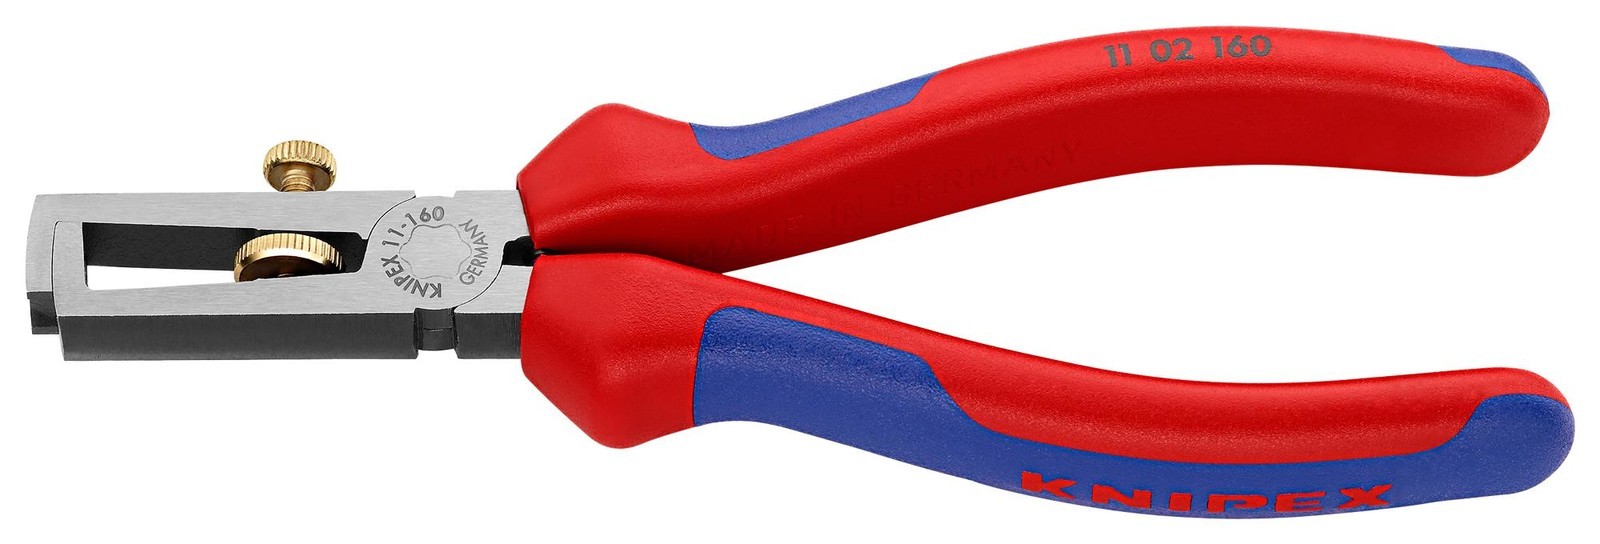 Knipex 11 02 160 Cable Stripper